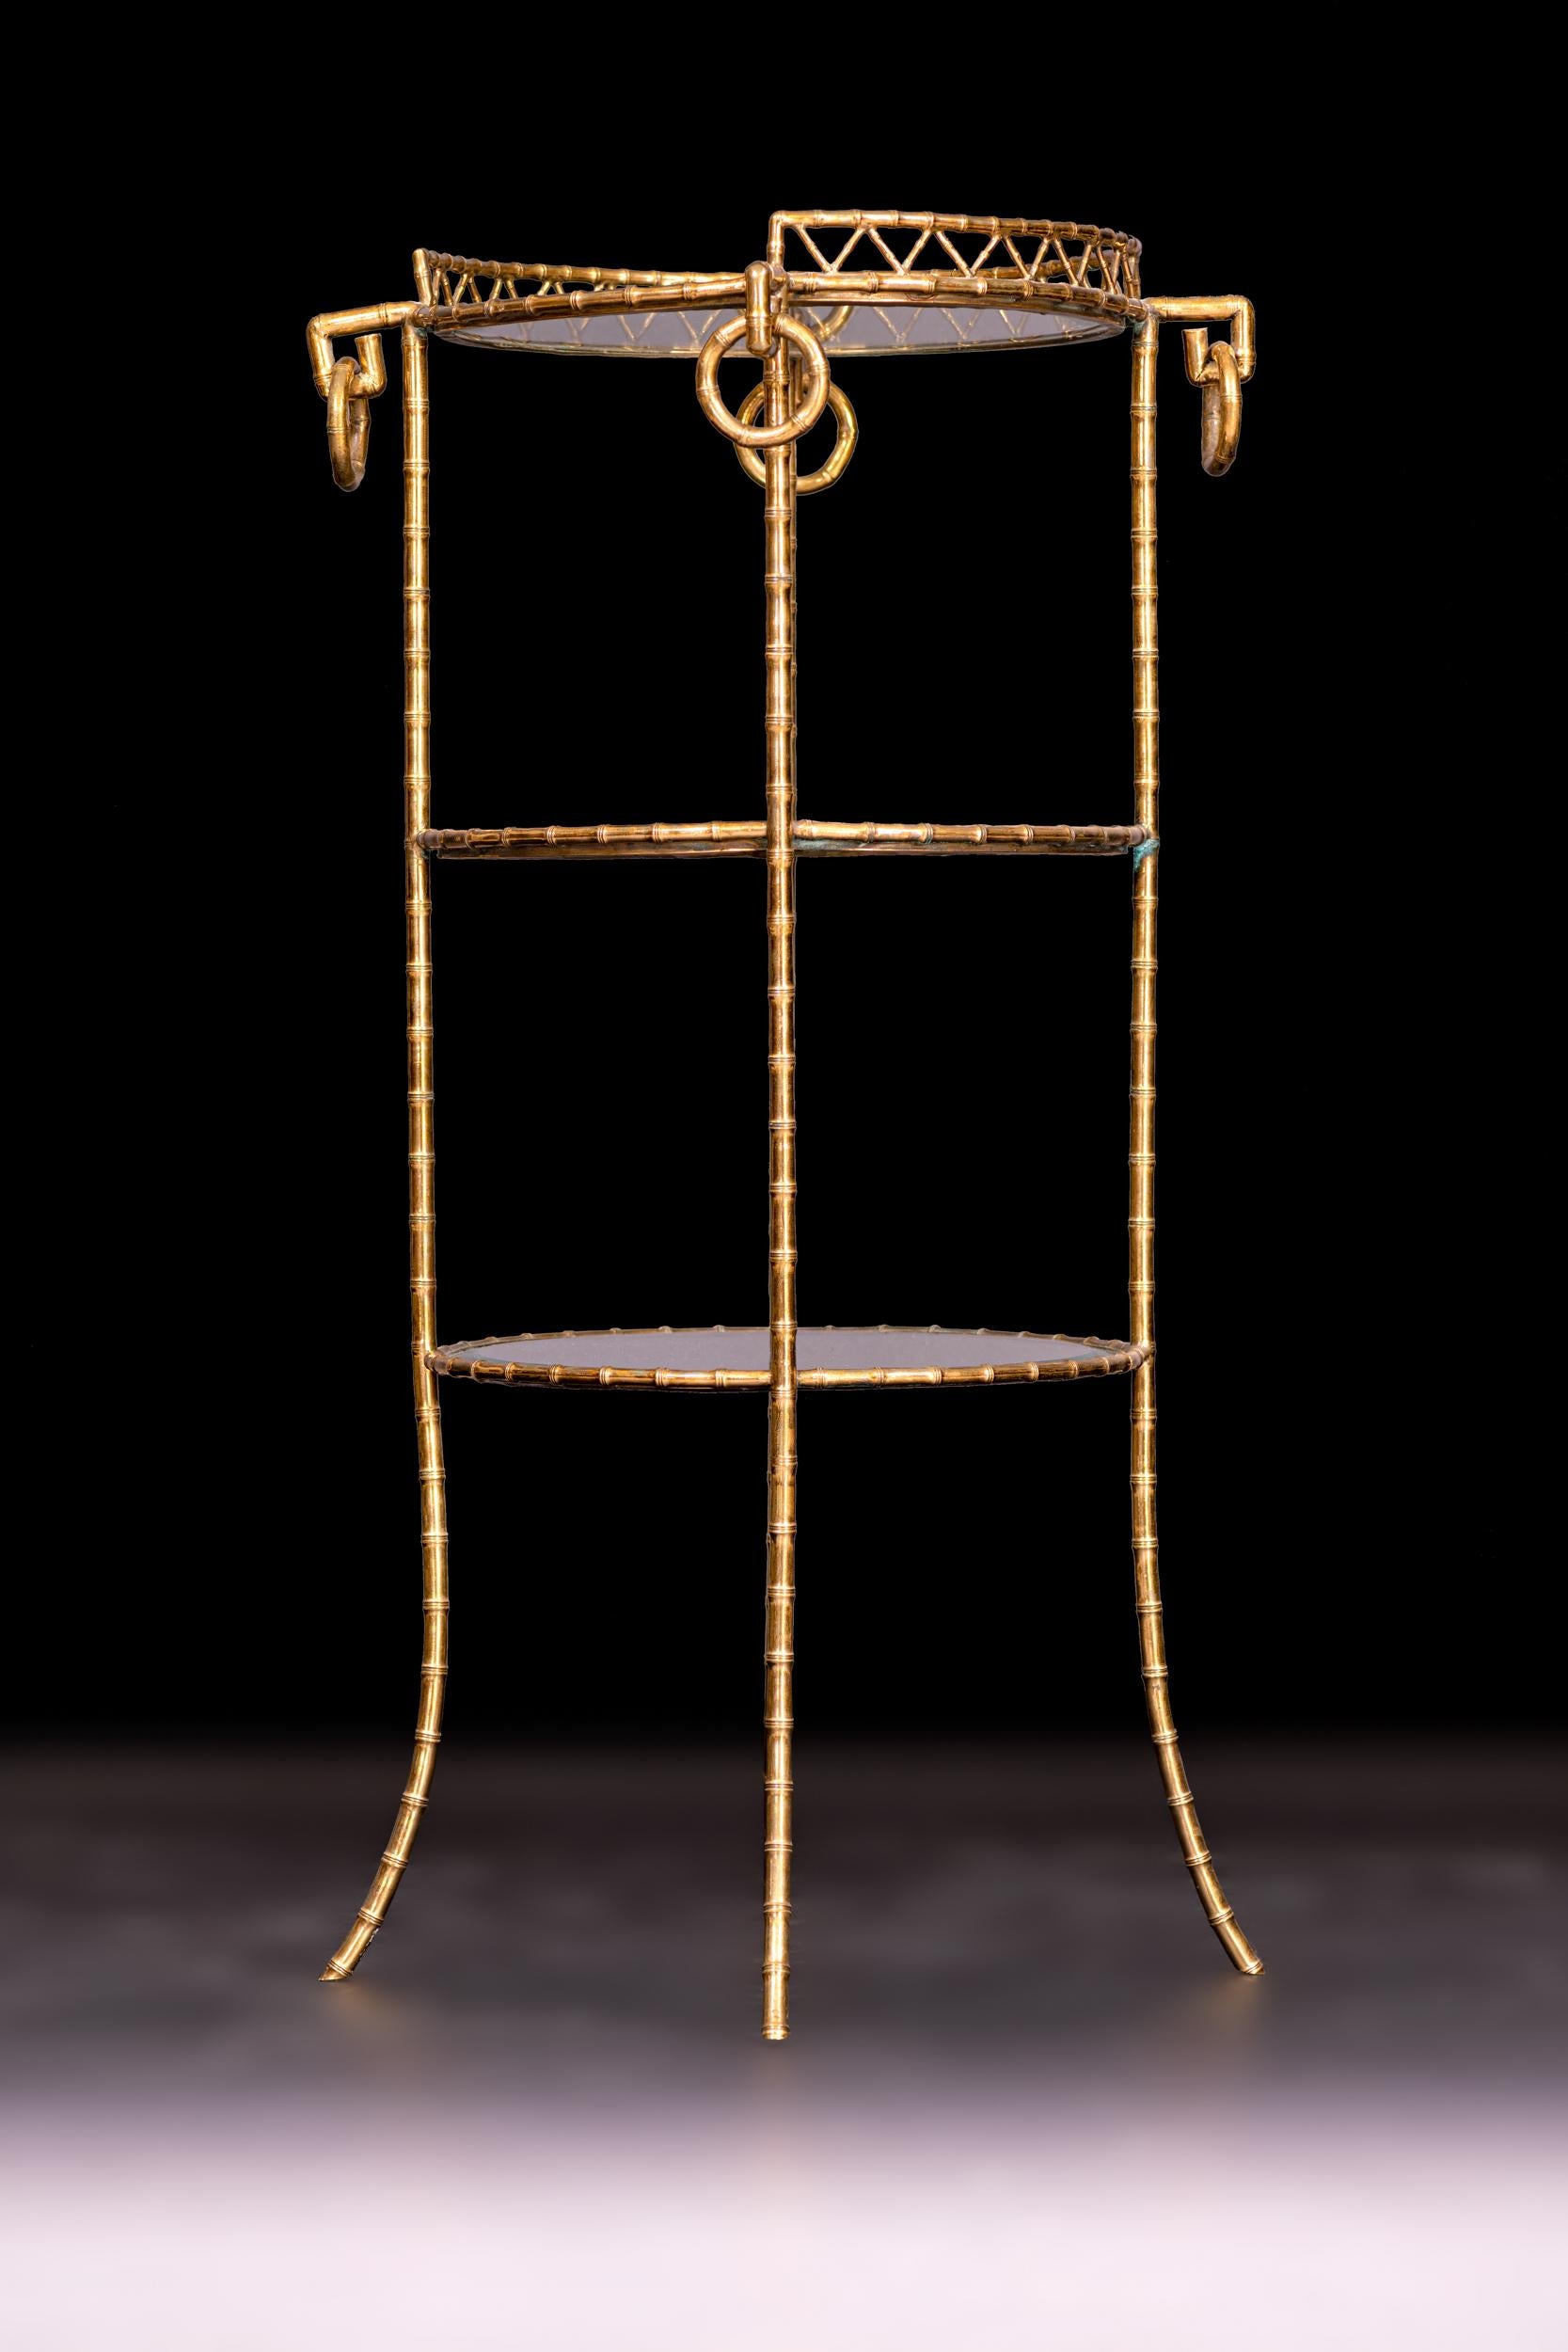 French Napoleon III Gilt Bronze and Glass Table by Maison Alphonse Giroux, Paris For Sale